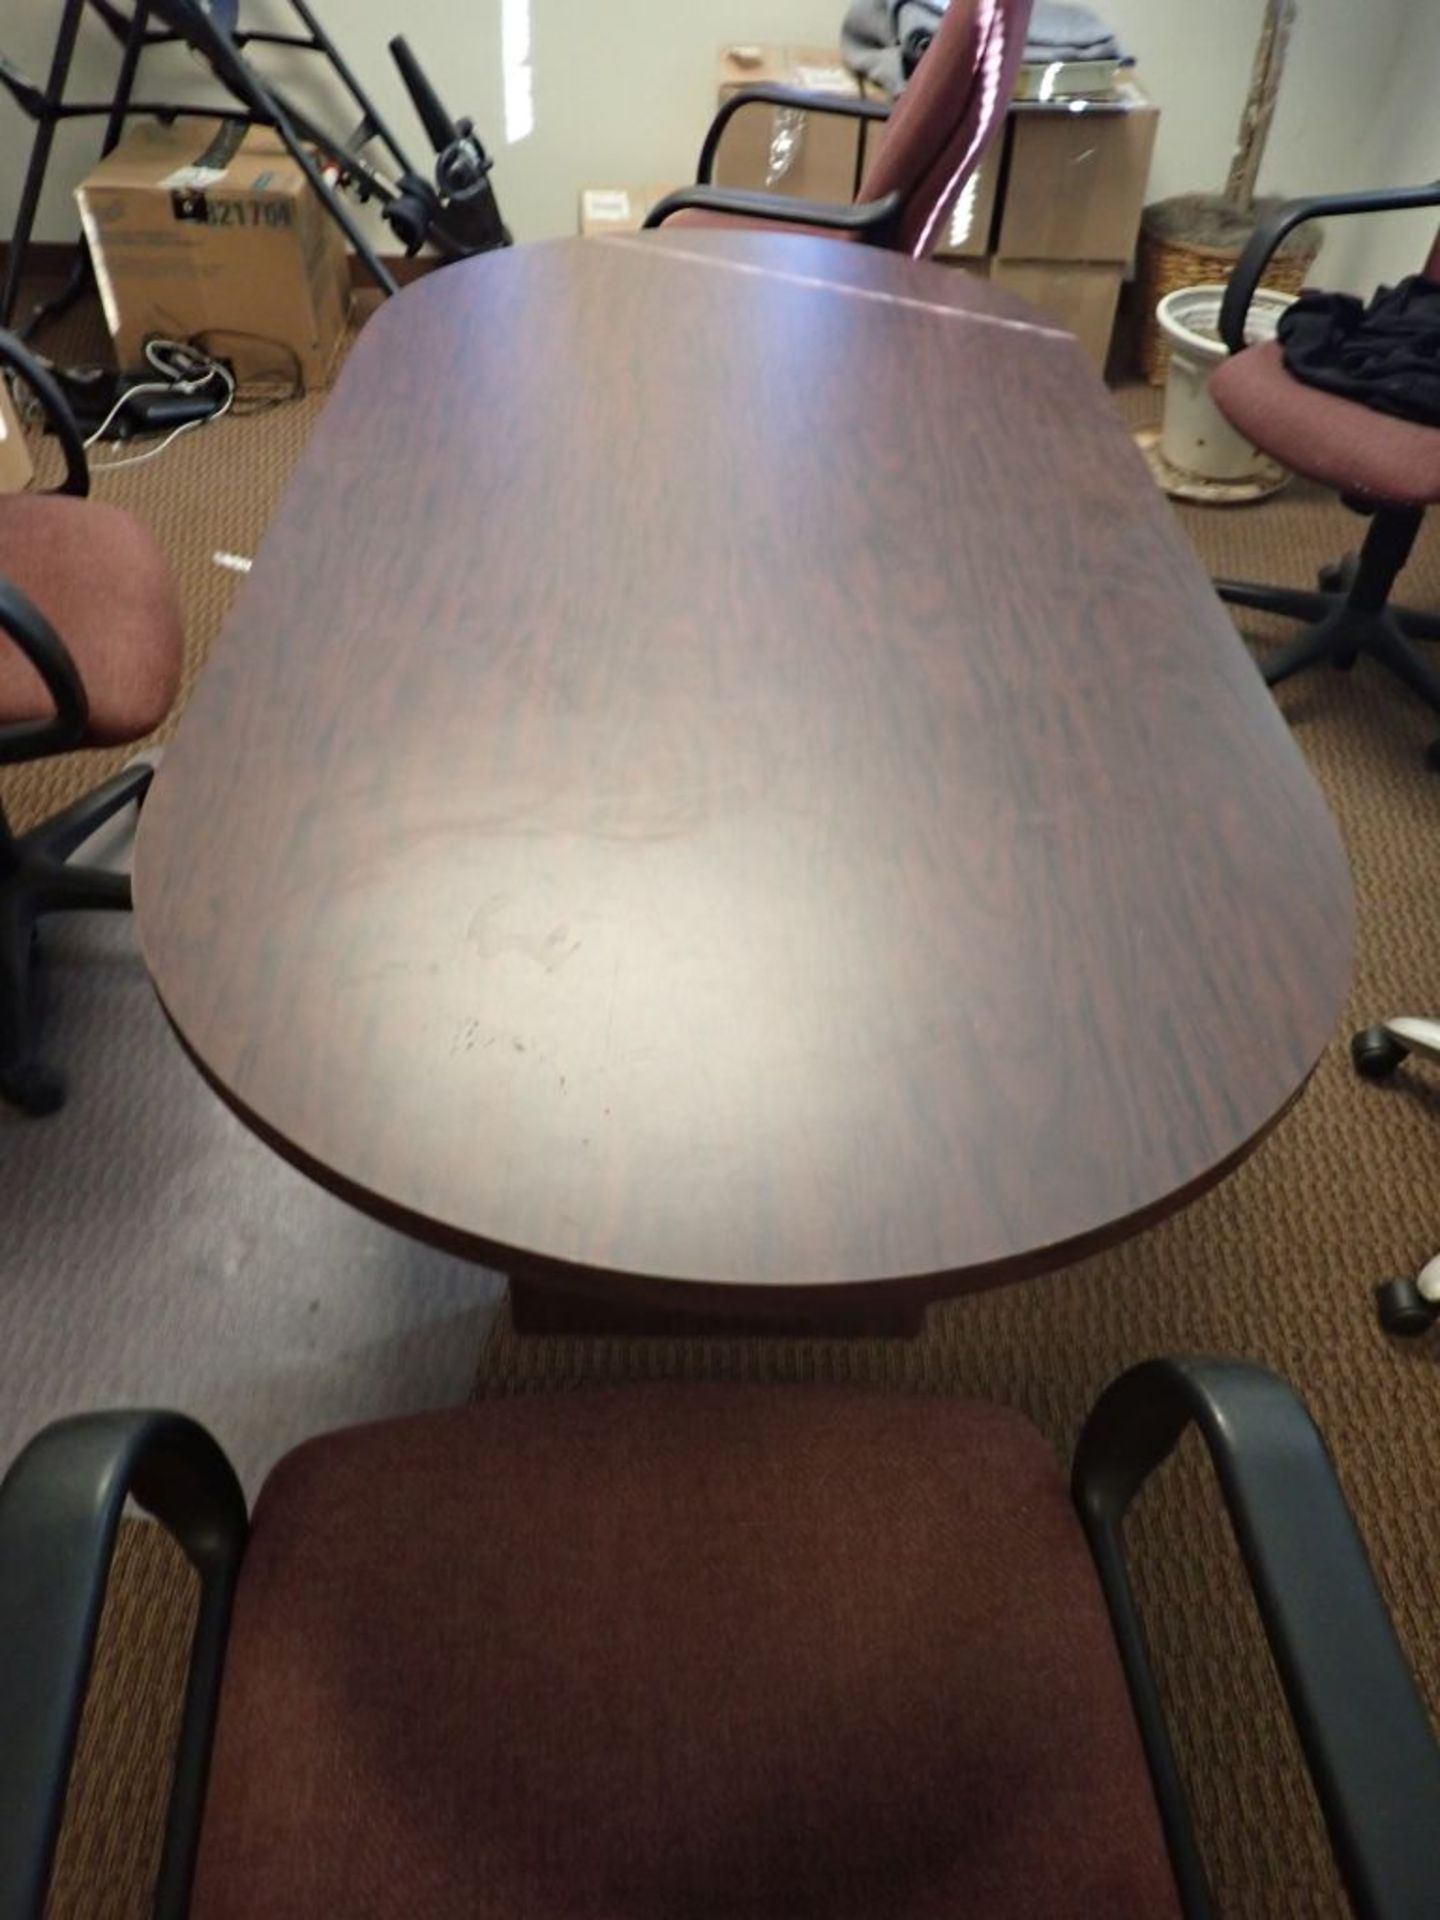 Lot of Conference Room Contents - Image 2 of 6